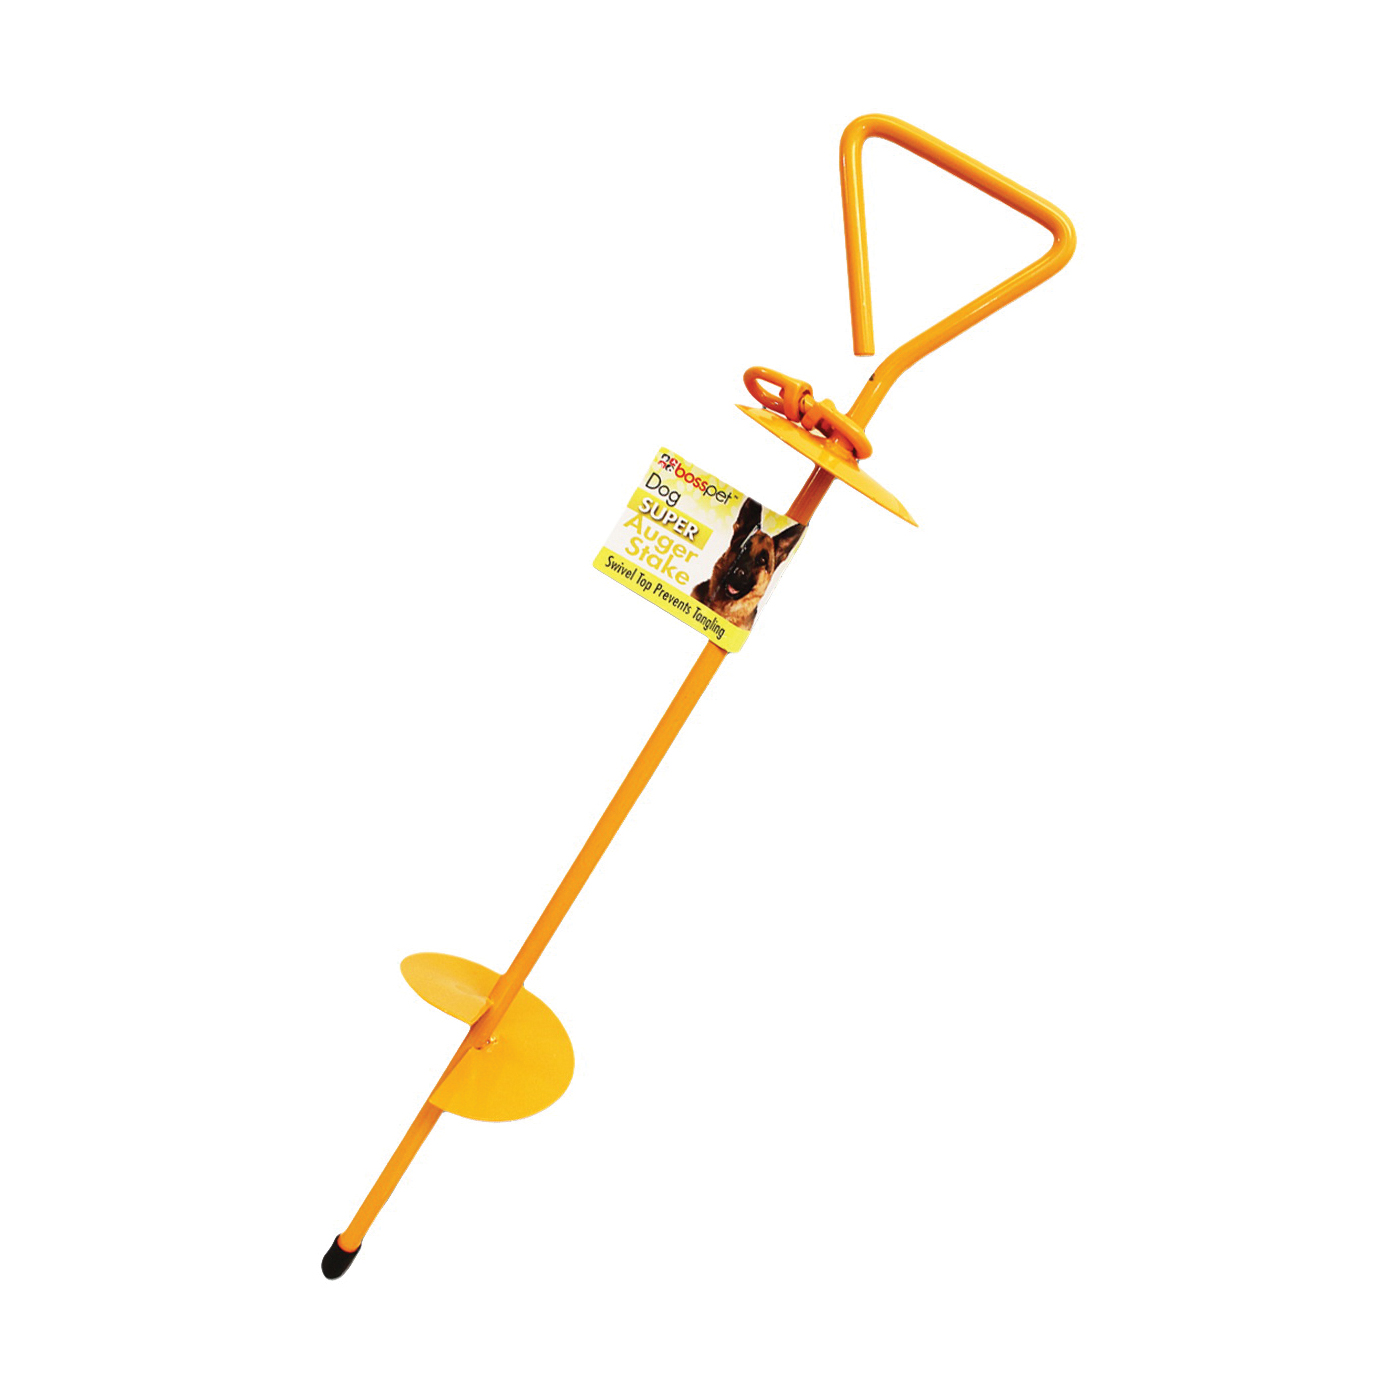 PDQ 01313 Super Stake, Auger, 24 in L Belt/Cable, Steel, Bright Yellow